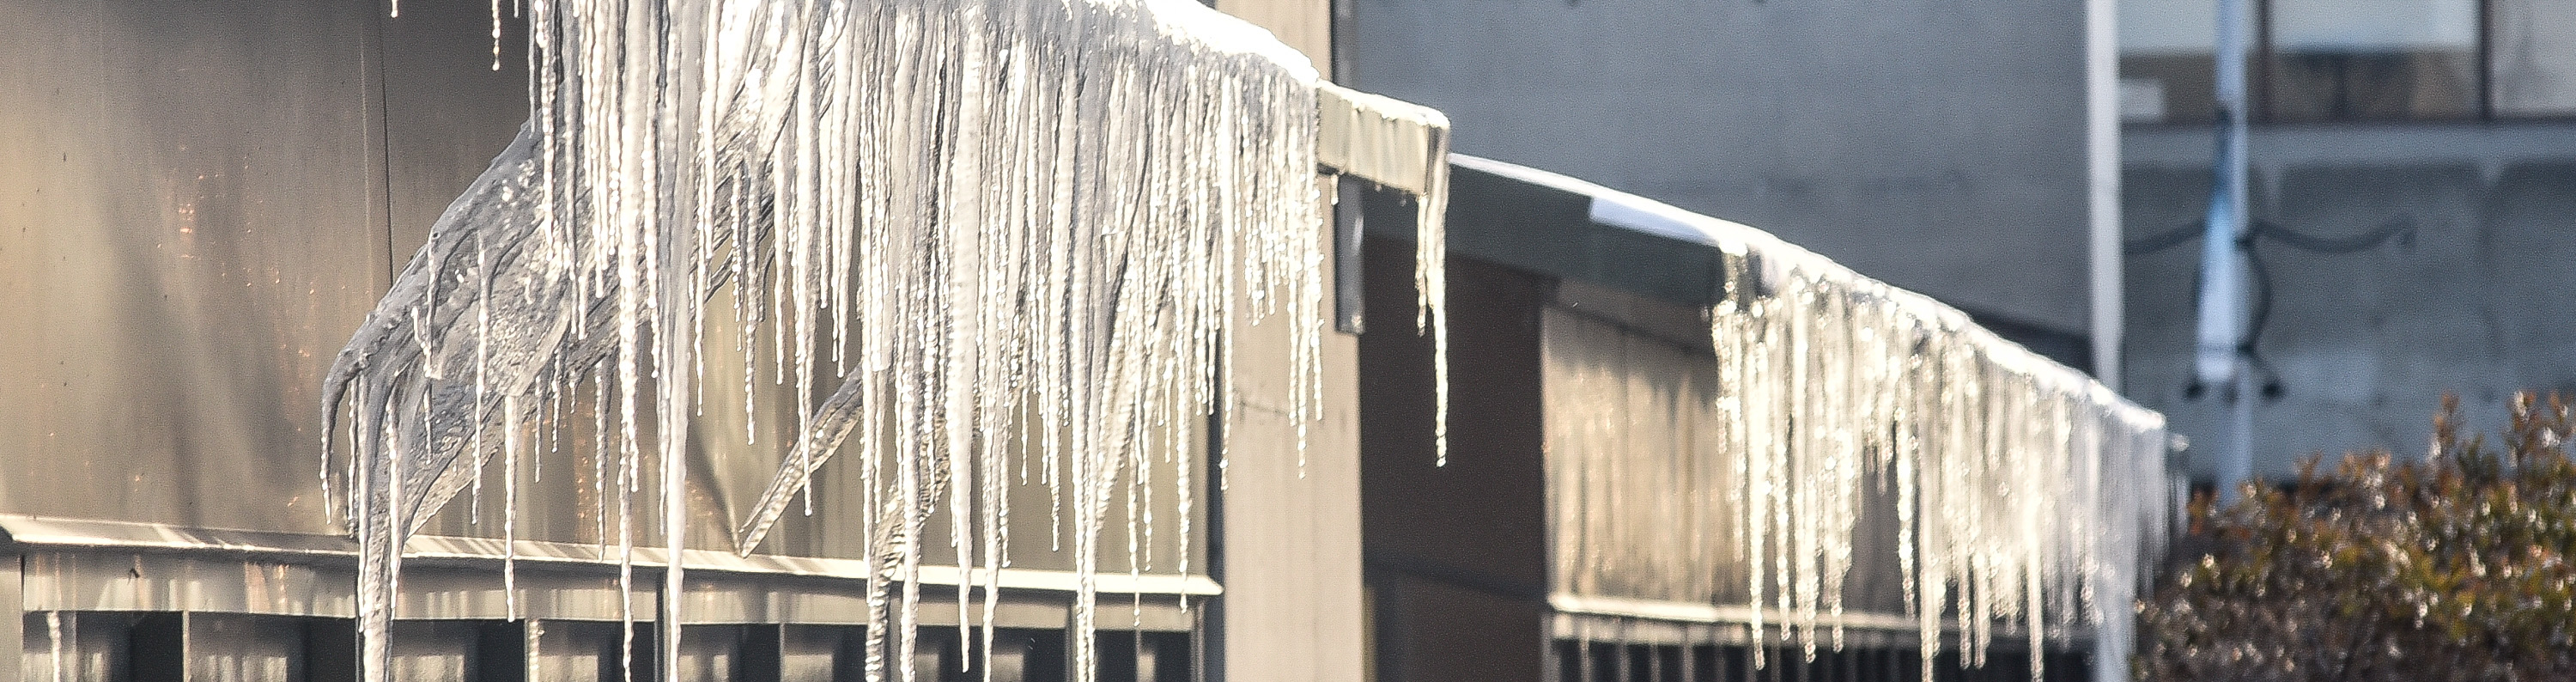 Icicles hanging from a UTSC building